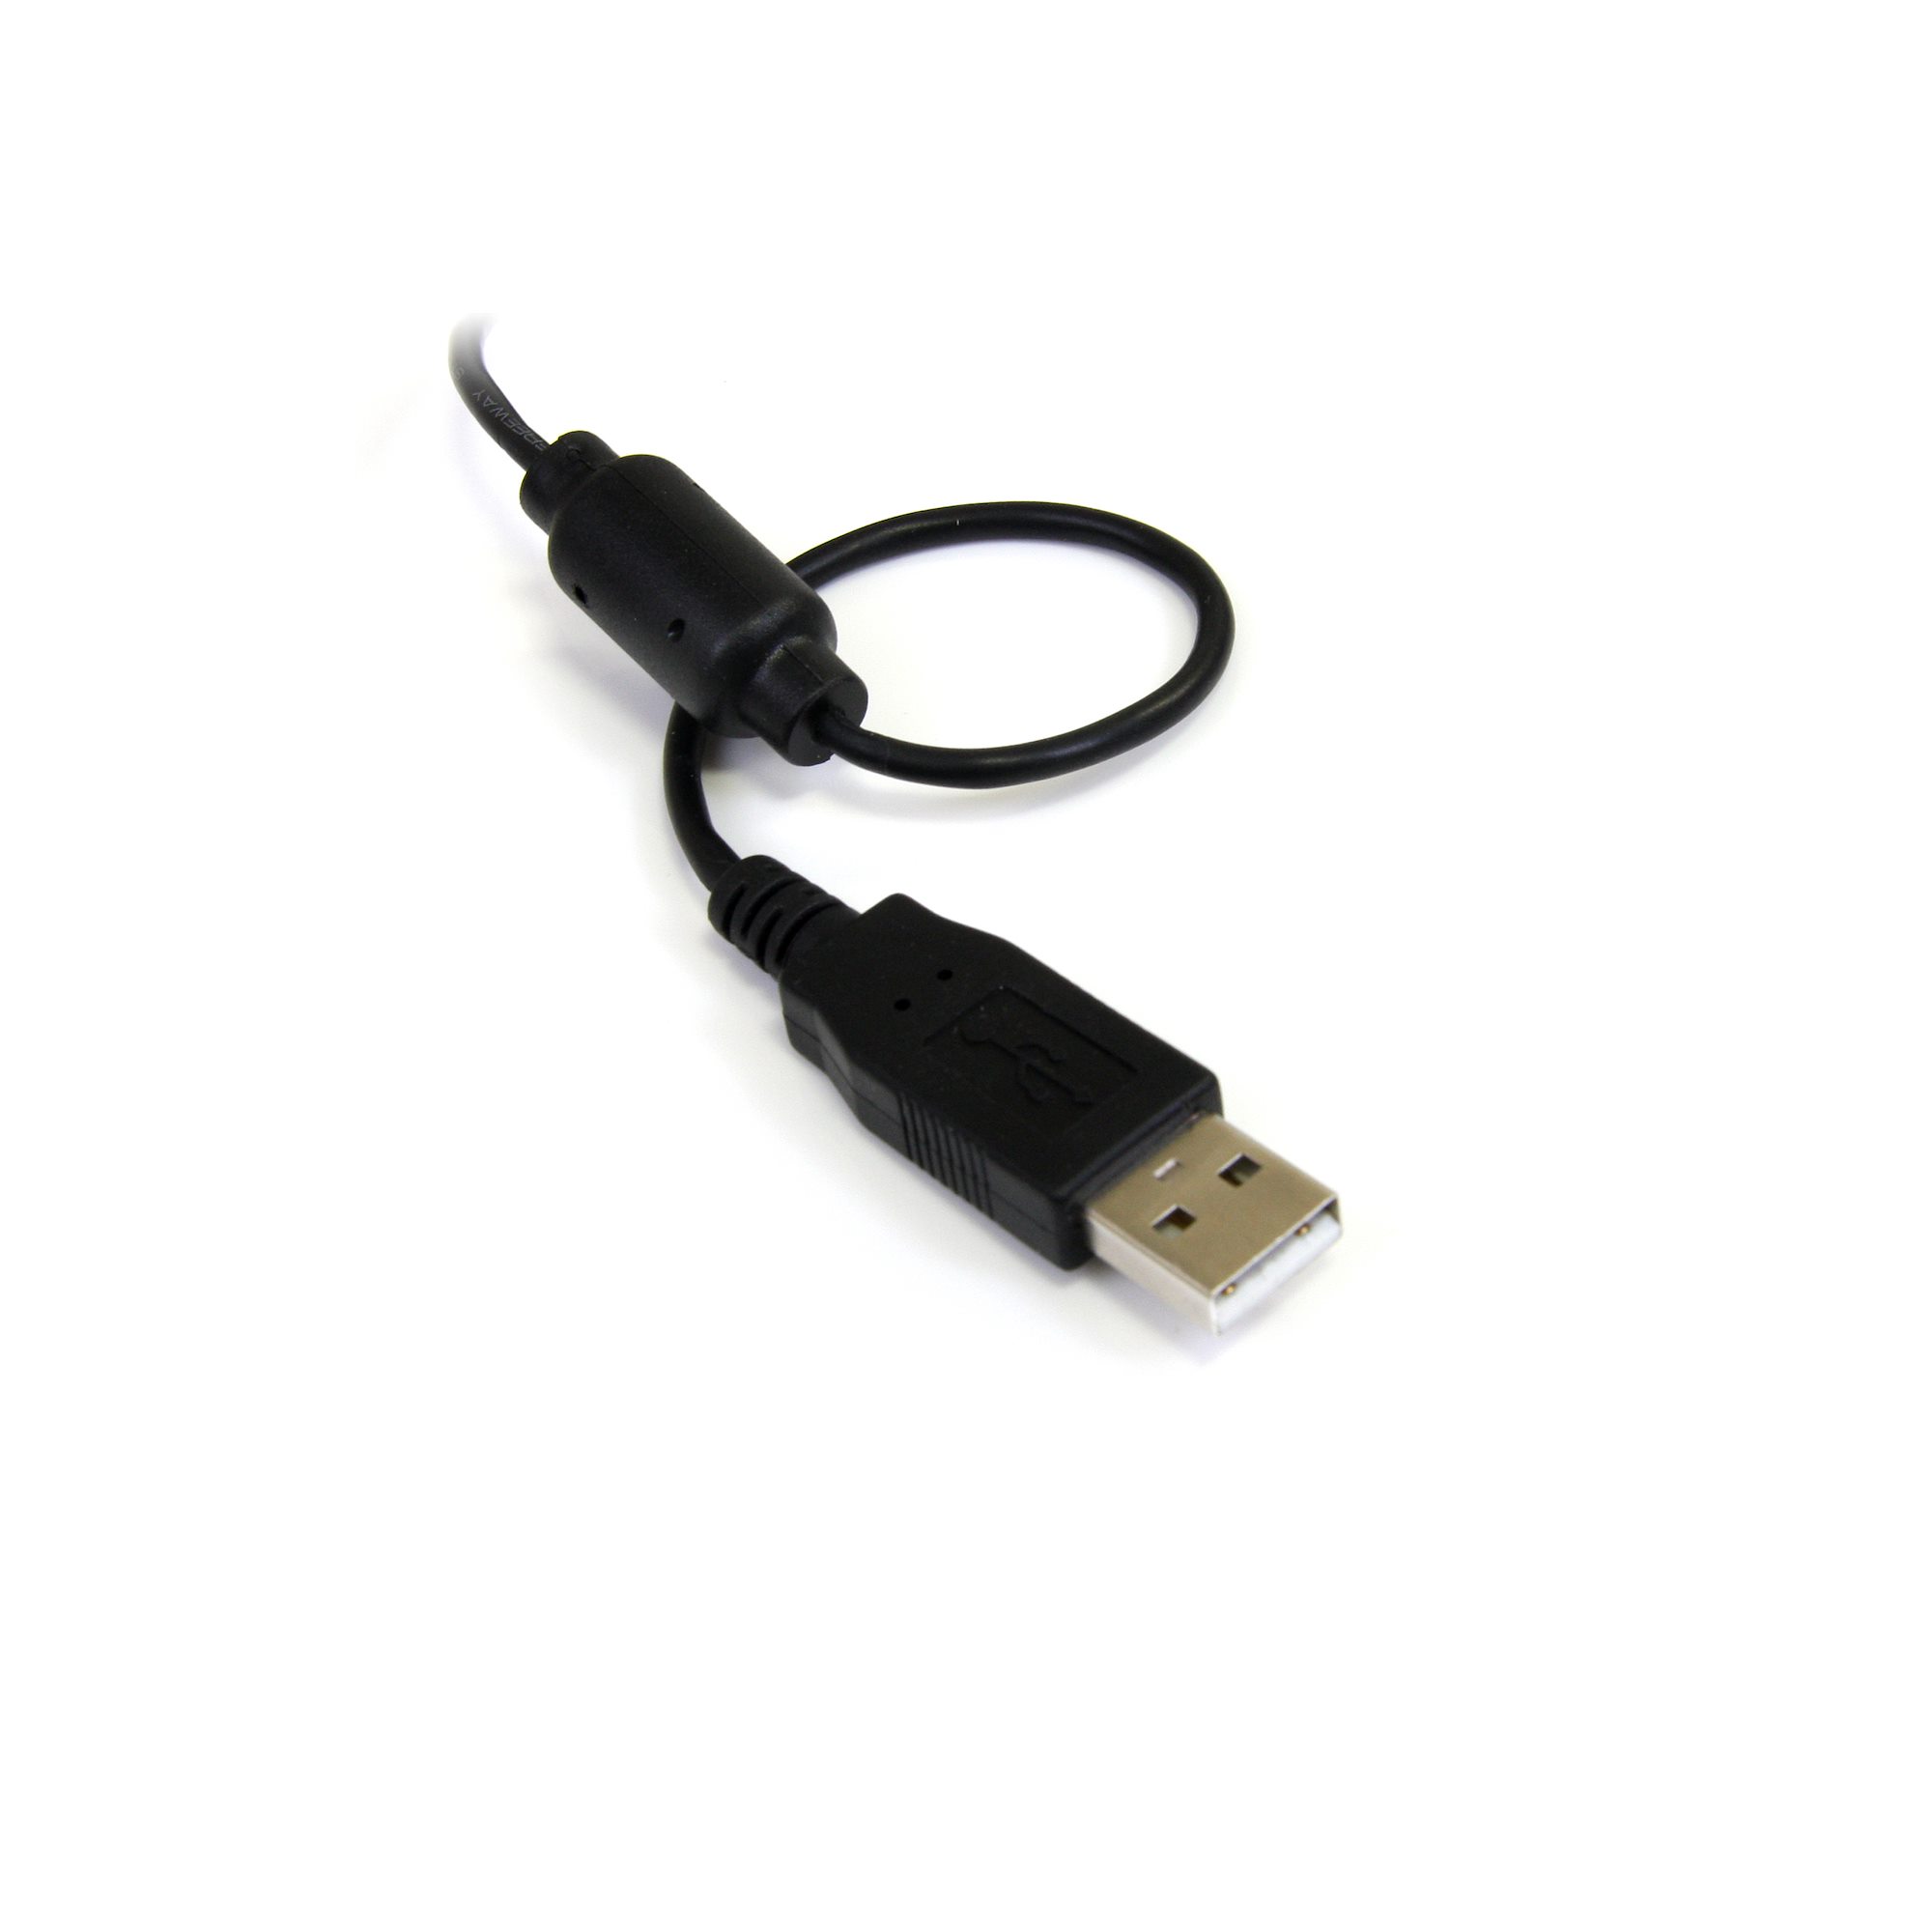 StarTech.com USB Video Capture Adapter Cable Twain Support Windows Only Analog to Digital Converter for Media Storage S-Video/Composite to USB 2.0 SD Video Capture Device Cable SVID2USB232 